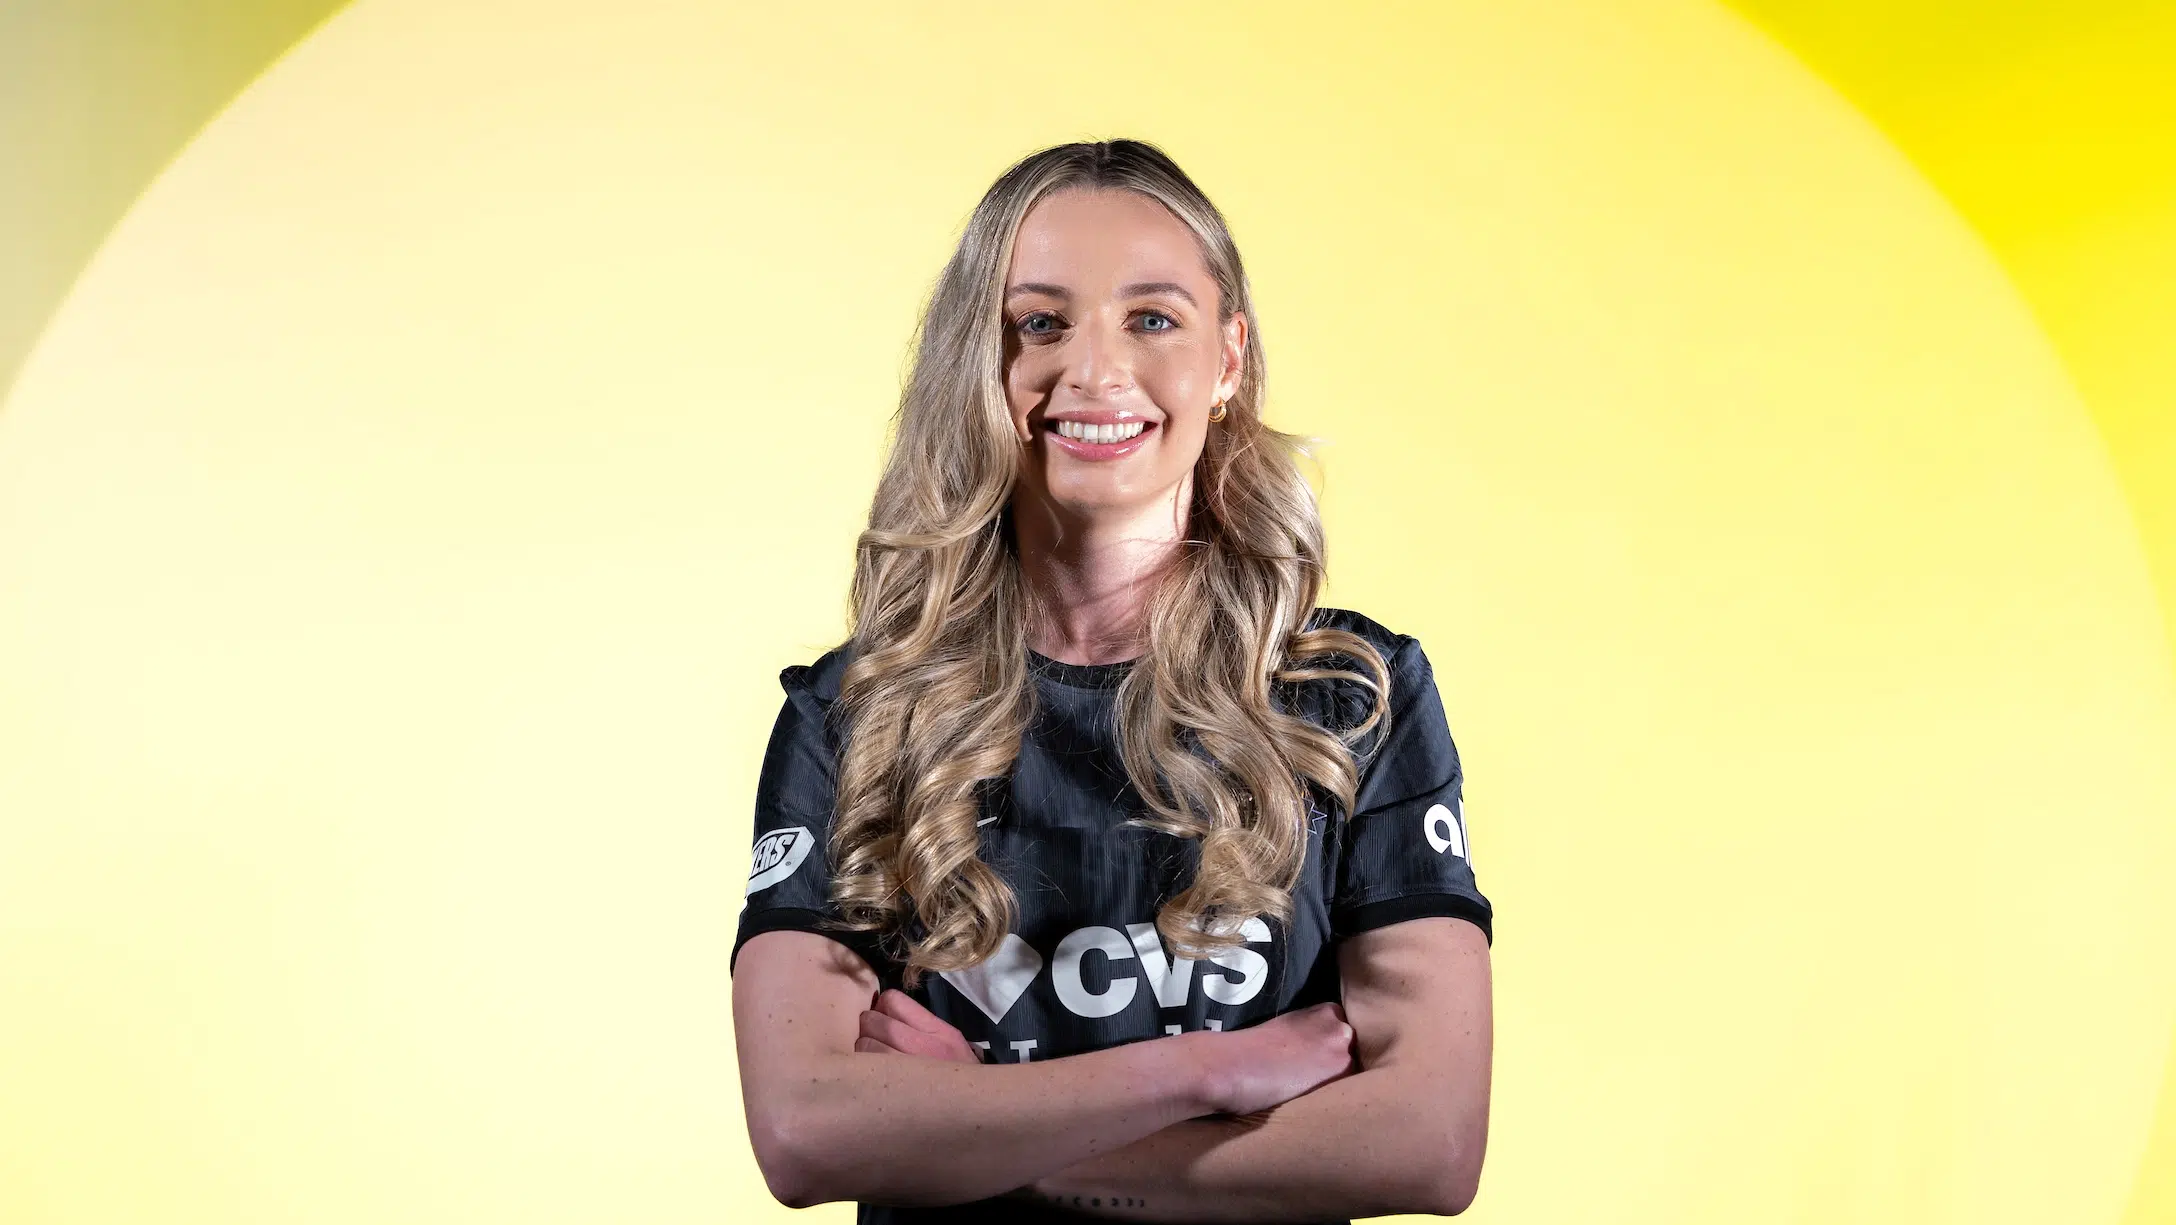 Gabby Carle in a black Spirit jersey with her arms crossed in front of a yellow background.